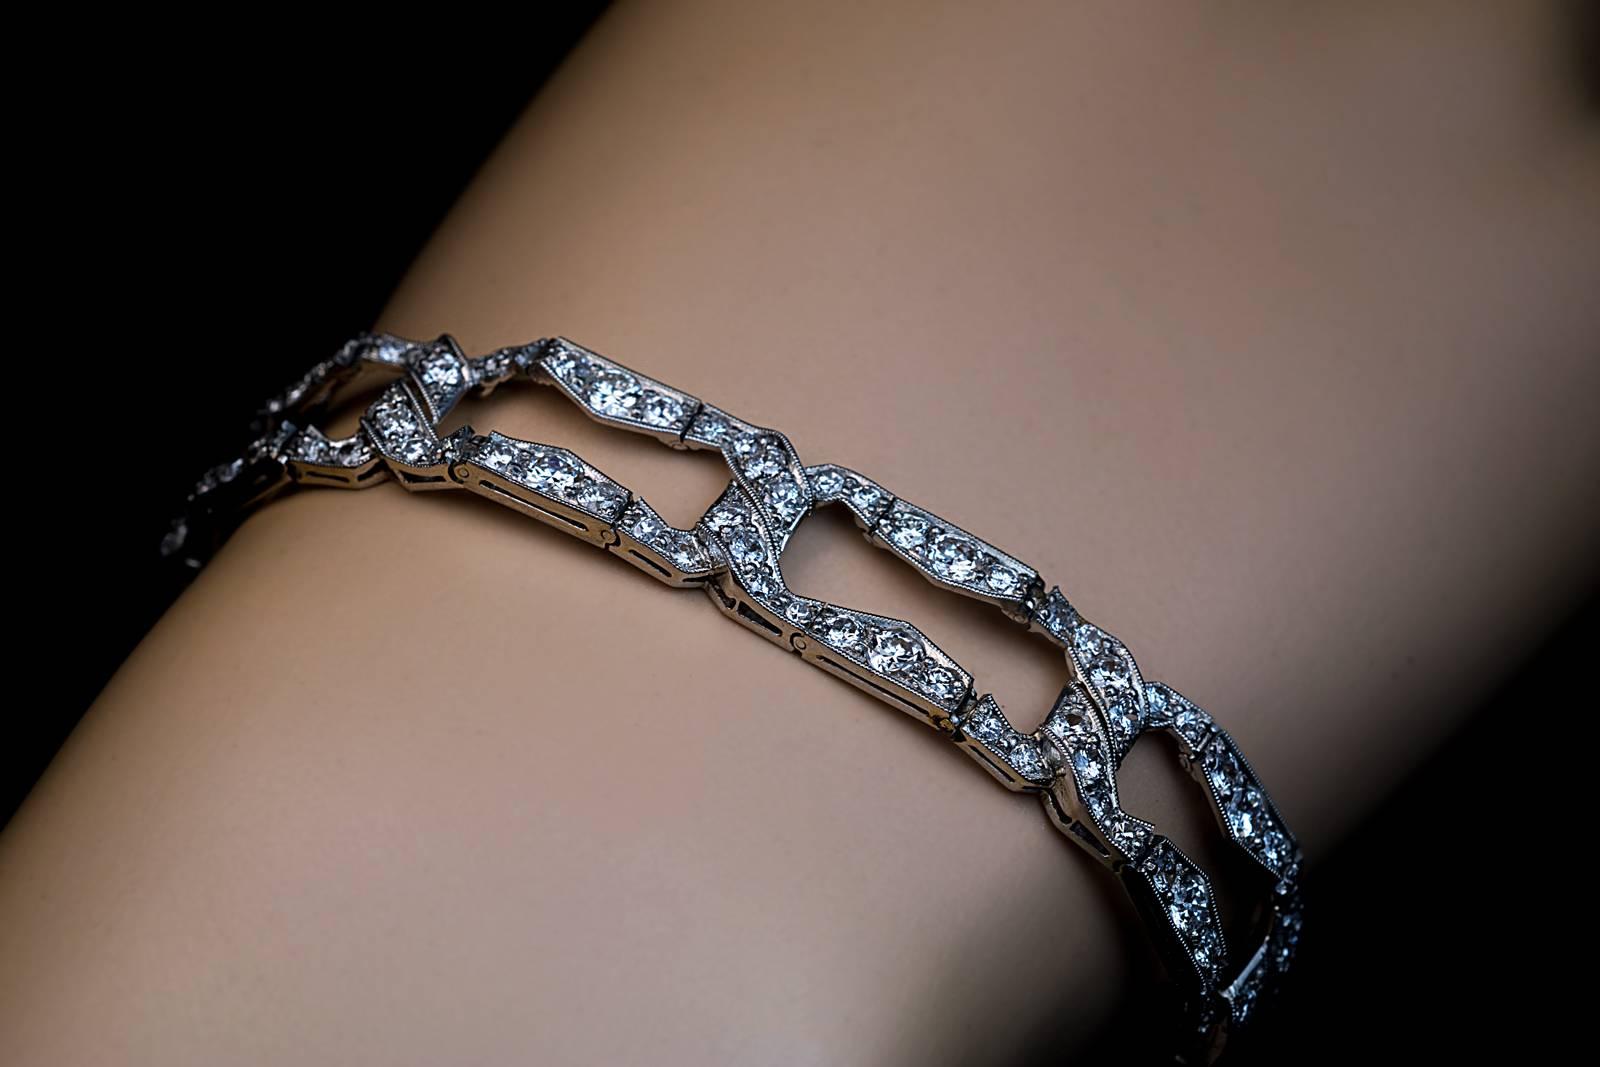 An elegant open link milgrain bracelet is hand-crafted in 950 platinum and densely set with sparkling bright white transitional cut brilliant diamonds.

Circa 1930s

Marked on clasp ‘950 Pt.’

Length 18.6 cm (7 5/16 in.)

Width 12 mm (1/2